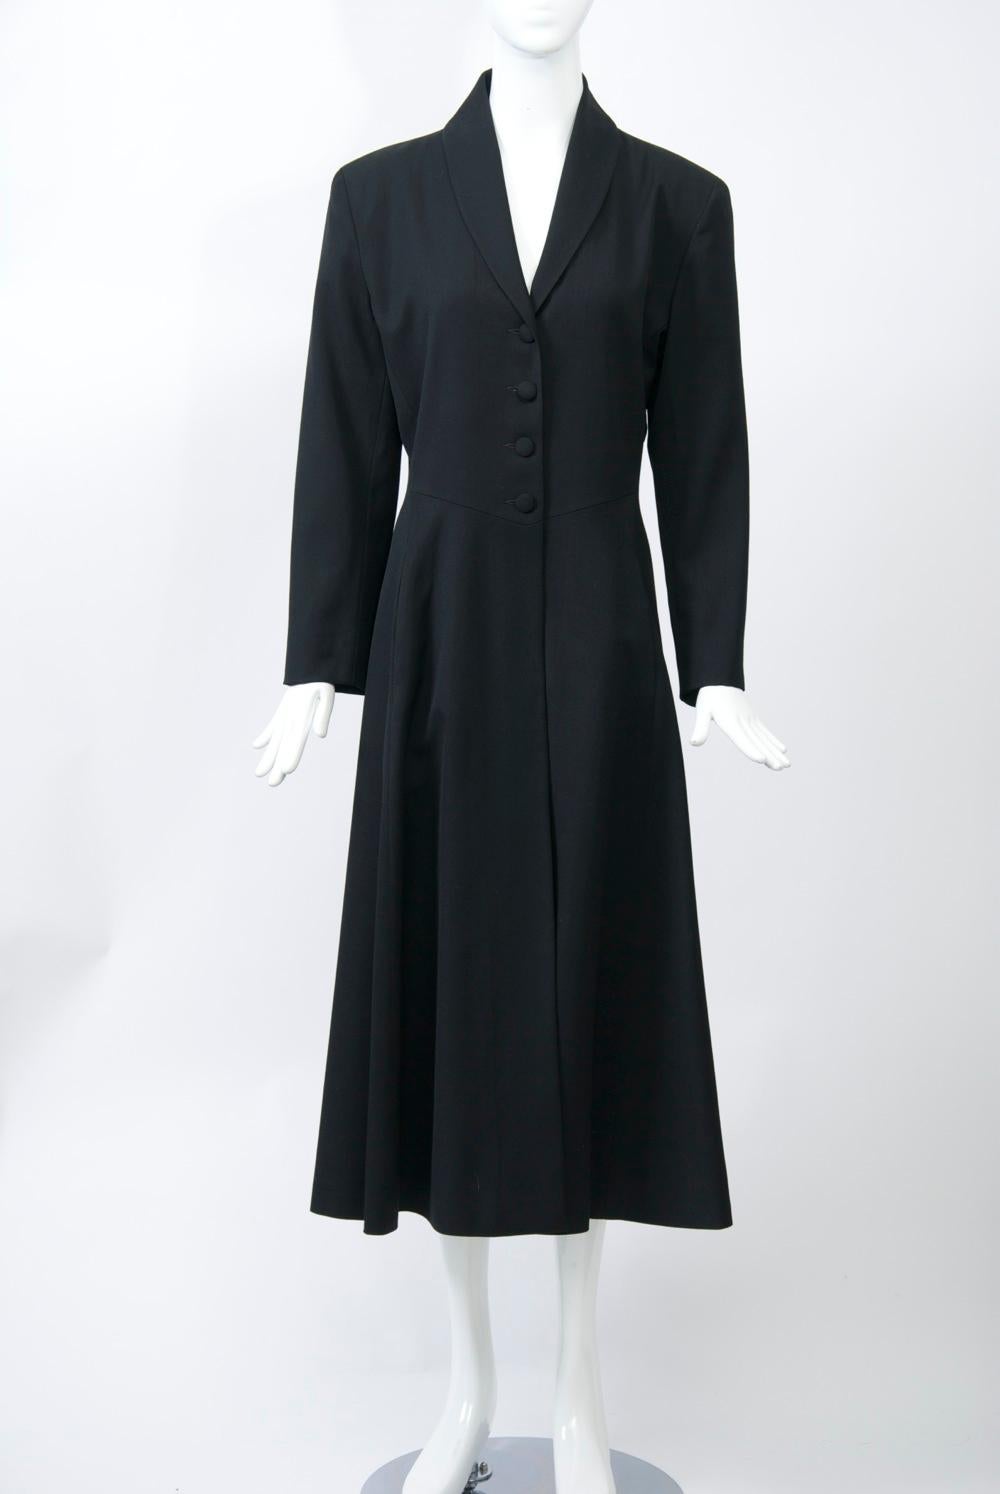 Princess-style coat by Agnes B in lightweight black wool featuring a shallow shawl collar and four self buttons. 1950s retro silhouette with nipped waist and flared skirt. Labeled size 2. Please see measurements below.